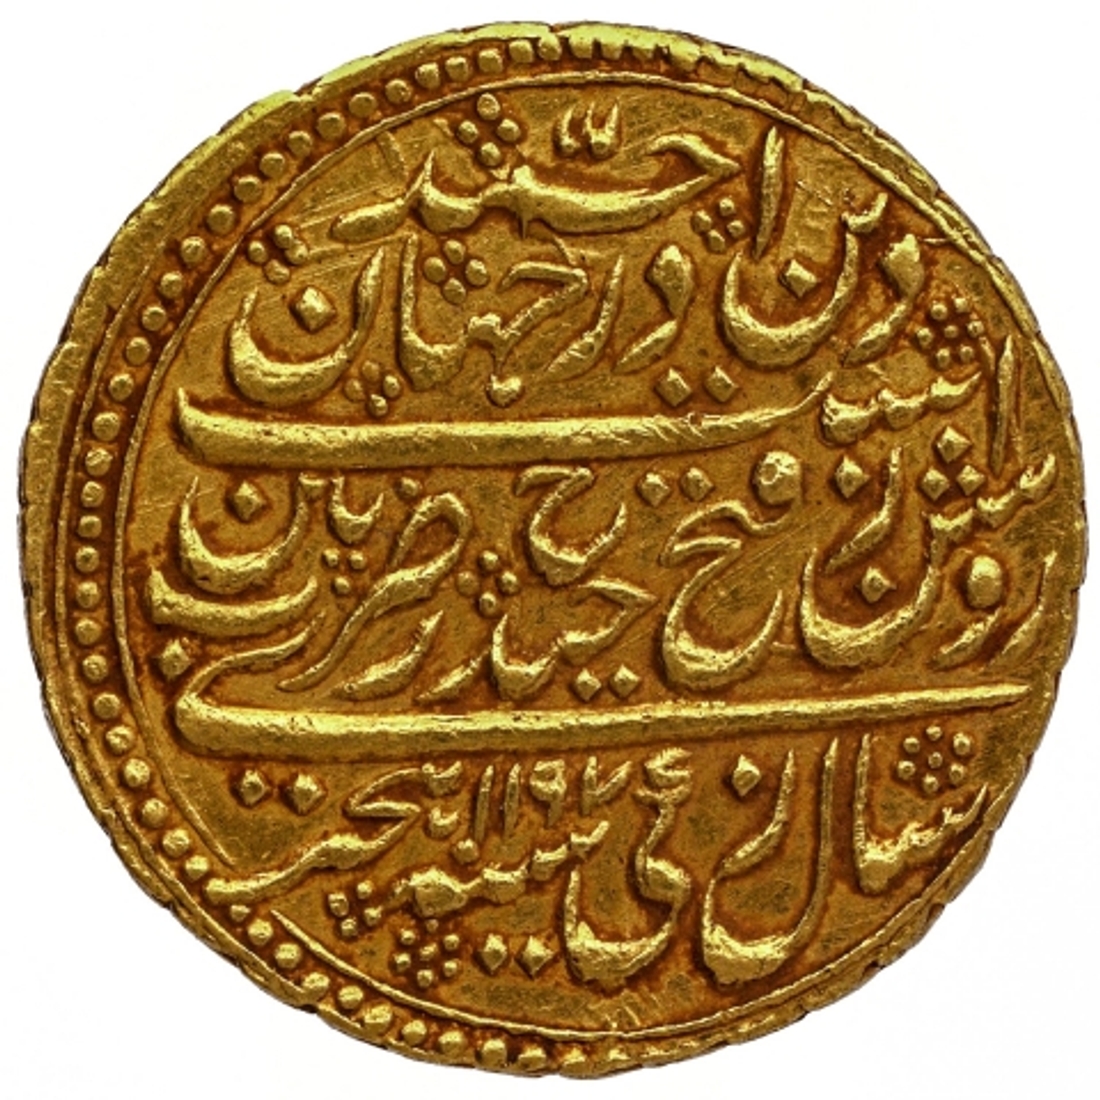 Gold Mohur Coin of Tipu Sultan of Patan Mint of Mysore Kingdom.